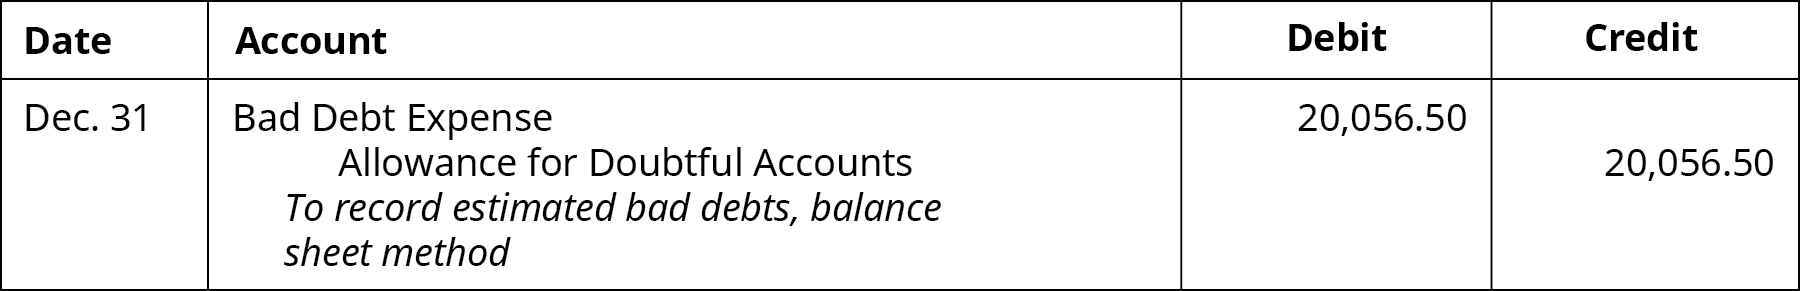 Account For Uncollectible Accounts Using The Balance Sheet And Ine Statement Approaches Principles Of Accounting Volume 1 Financial Accounting